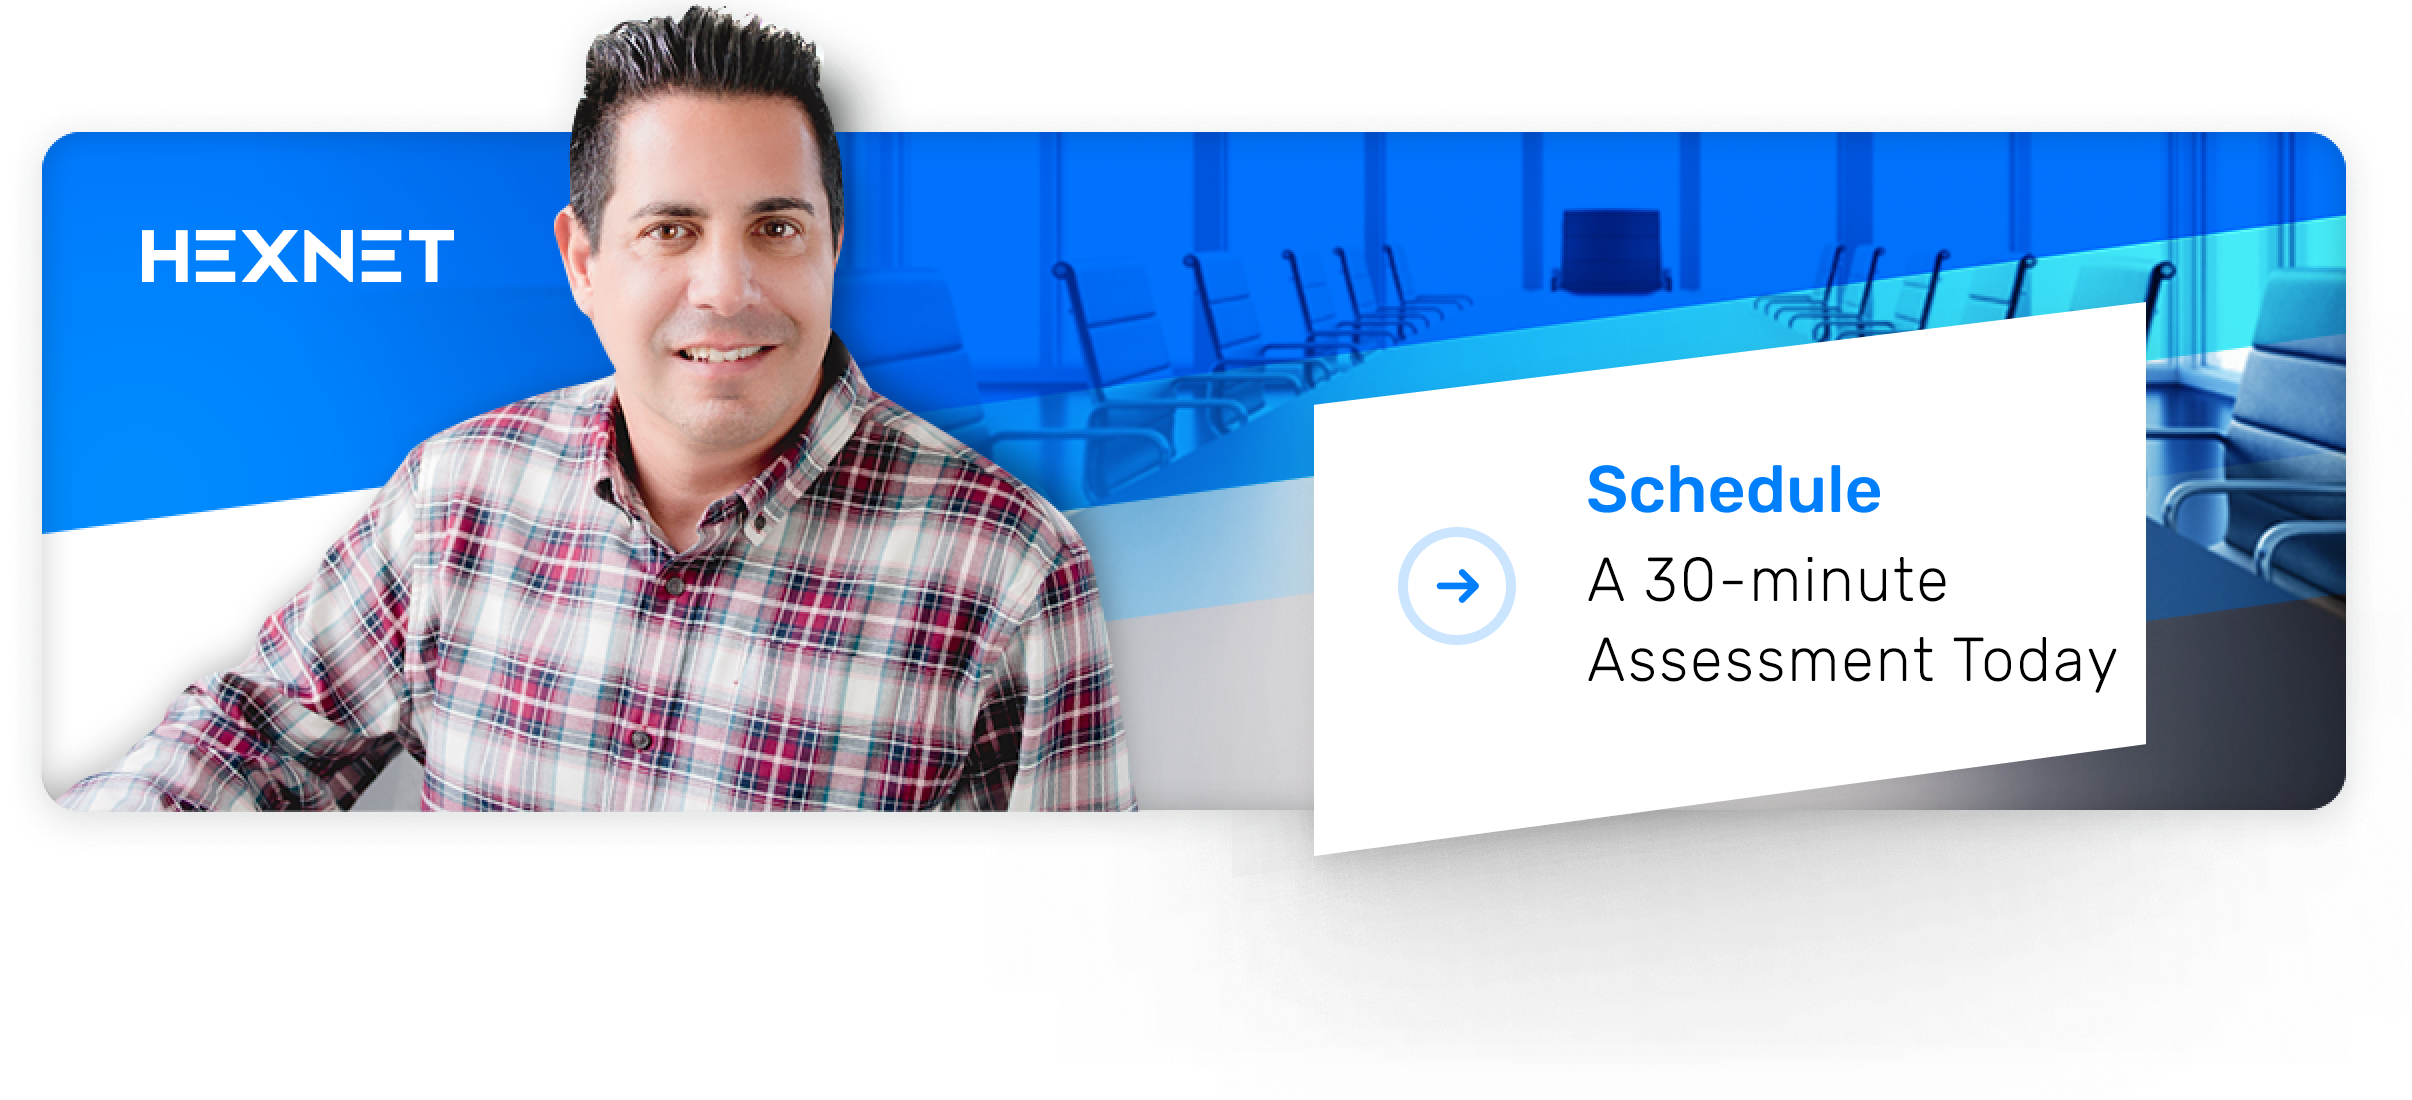 Schedule A 30-minute Assessment Today